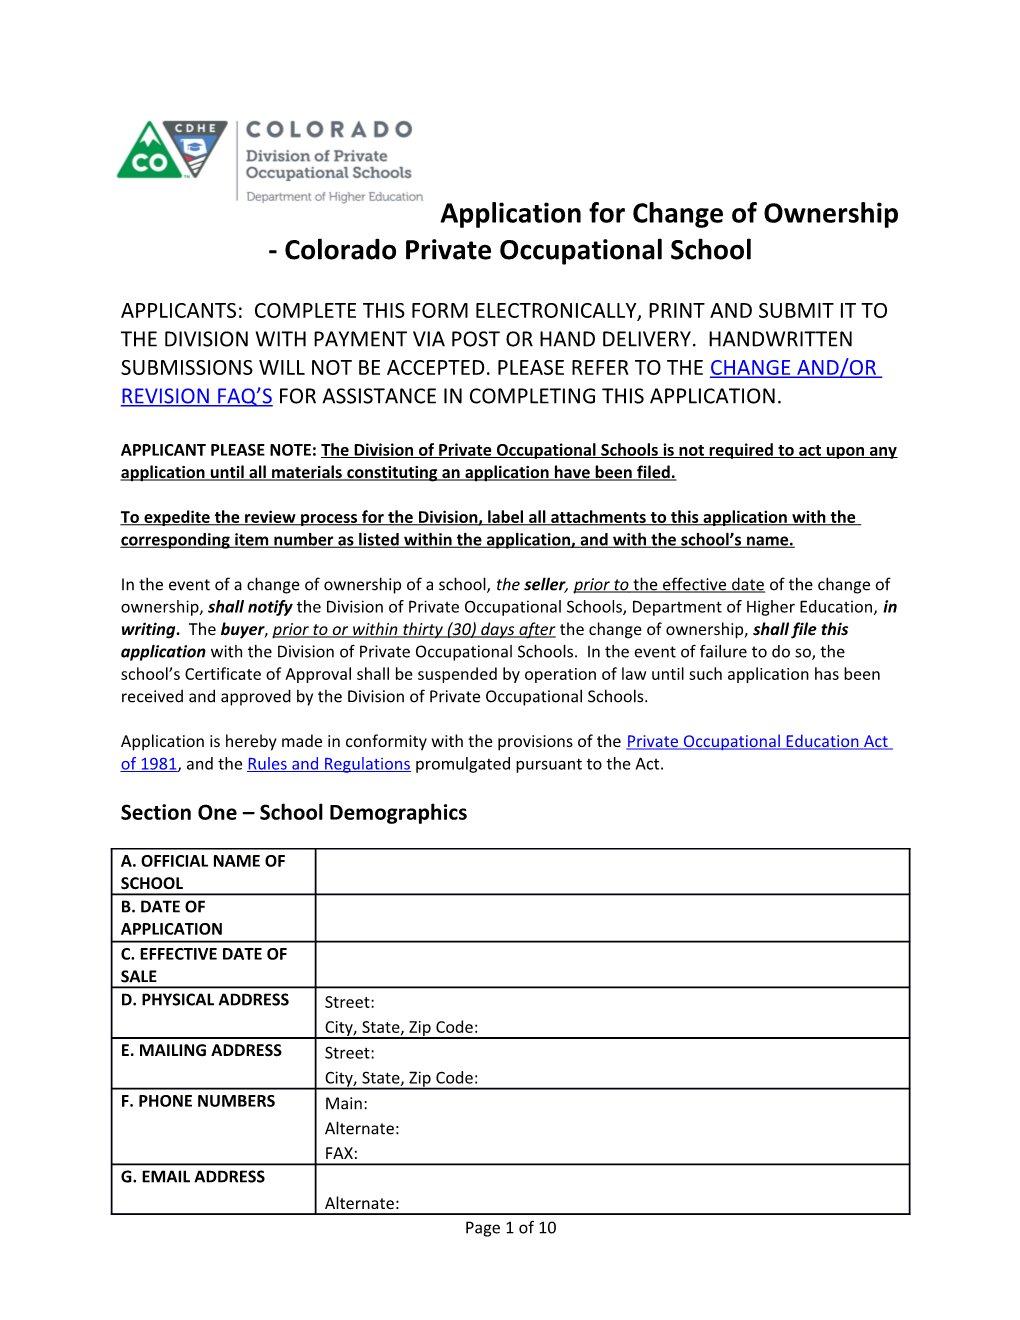 Application for Change of Ownership - Colorado Private Occupational School